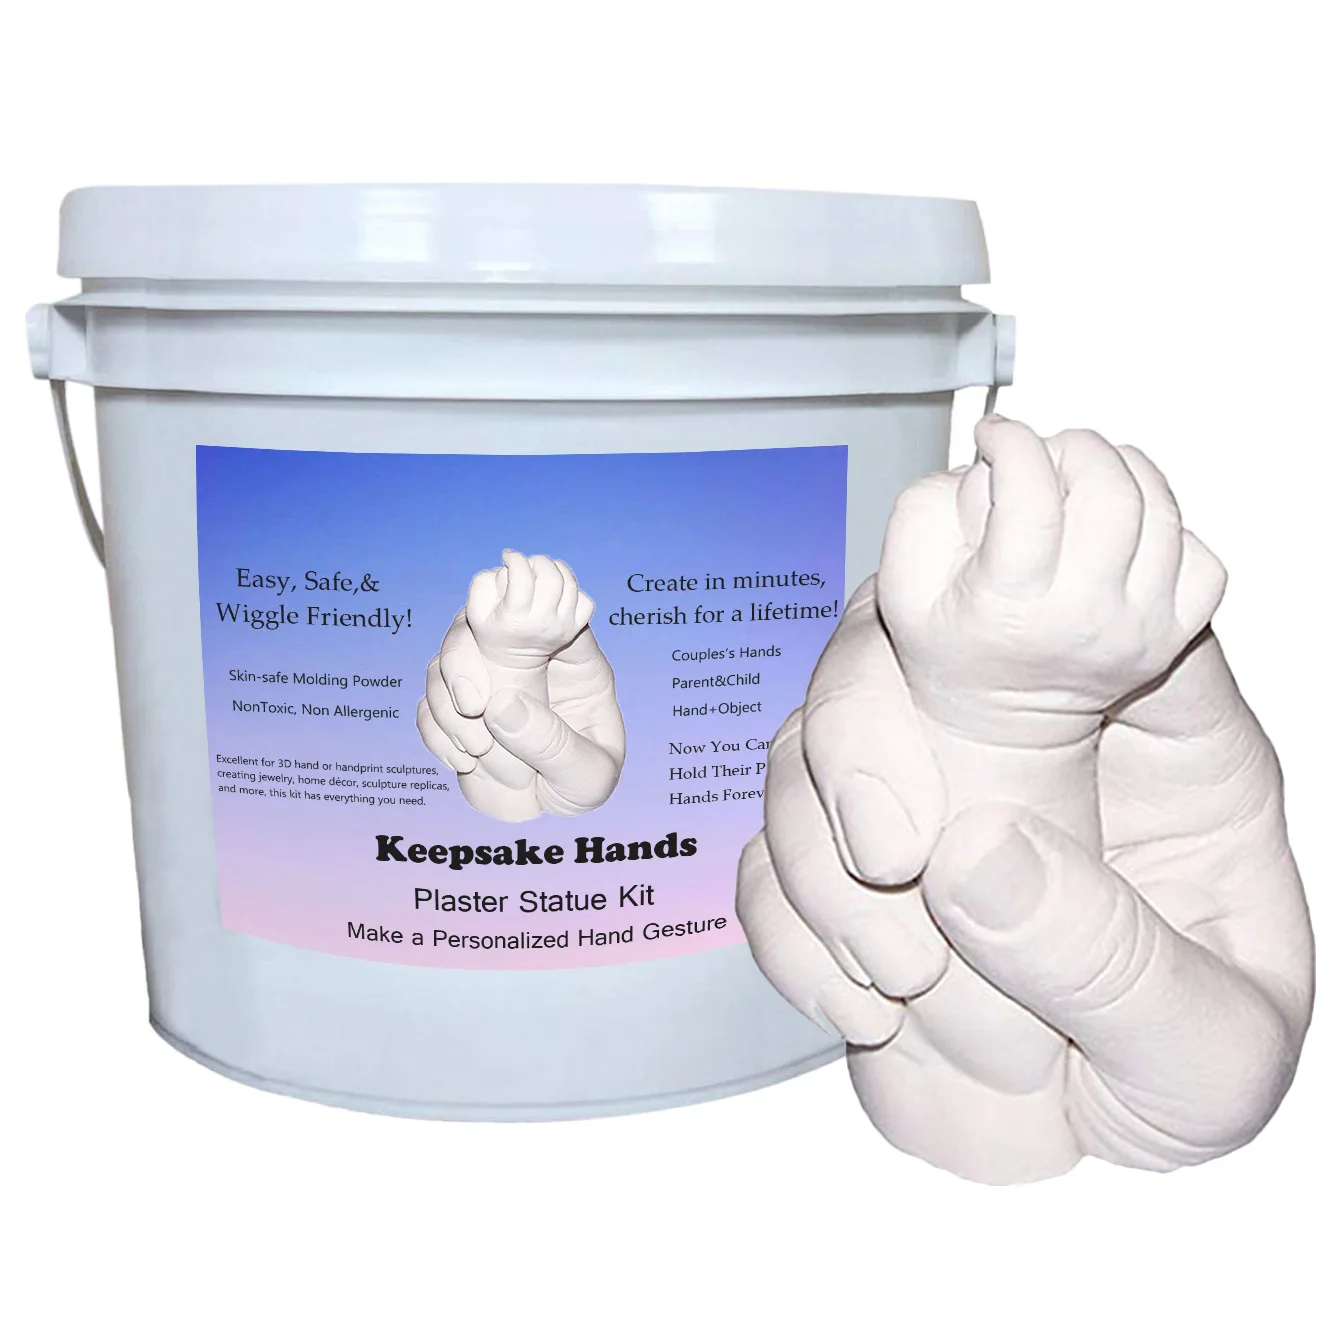 Casting kit hands with Molding Powder& Casting Tools Included,Most Complete Hand Molding Kit Available